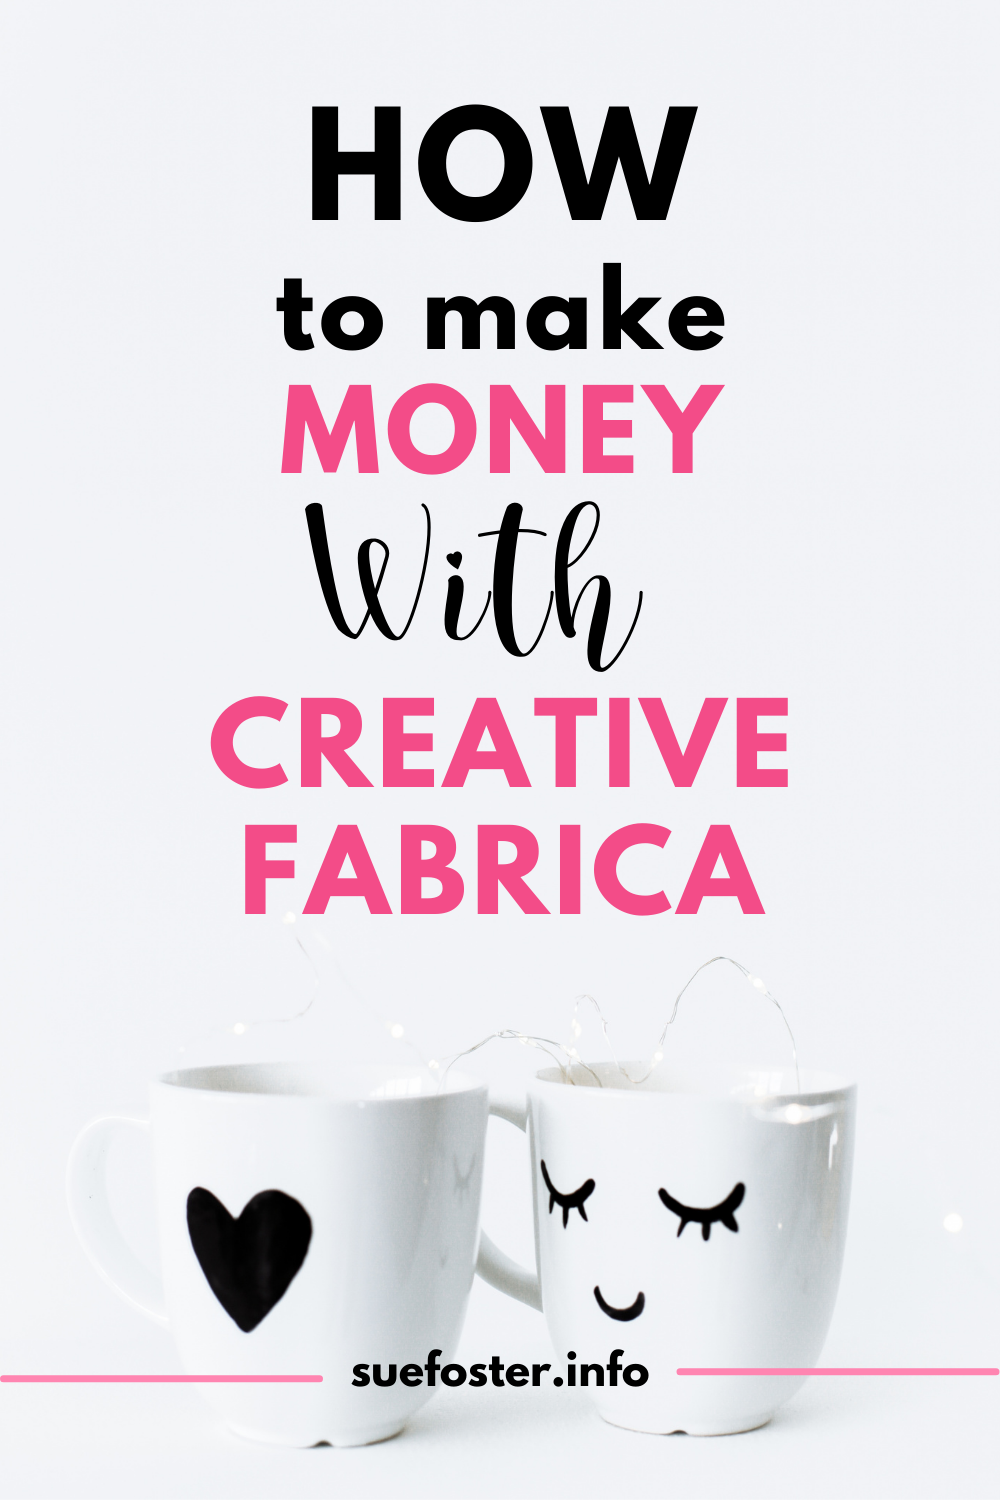 There are 3 ways that you can make money with Creative Fabrica, read on to find out how.